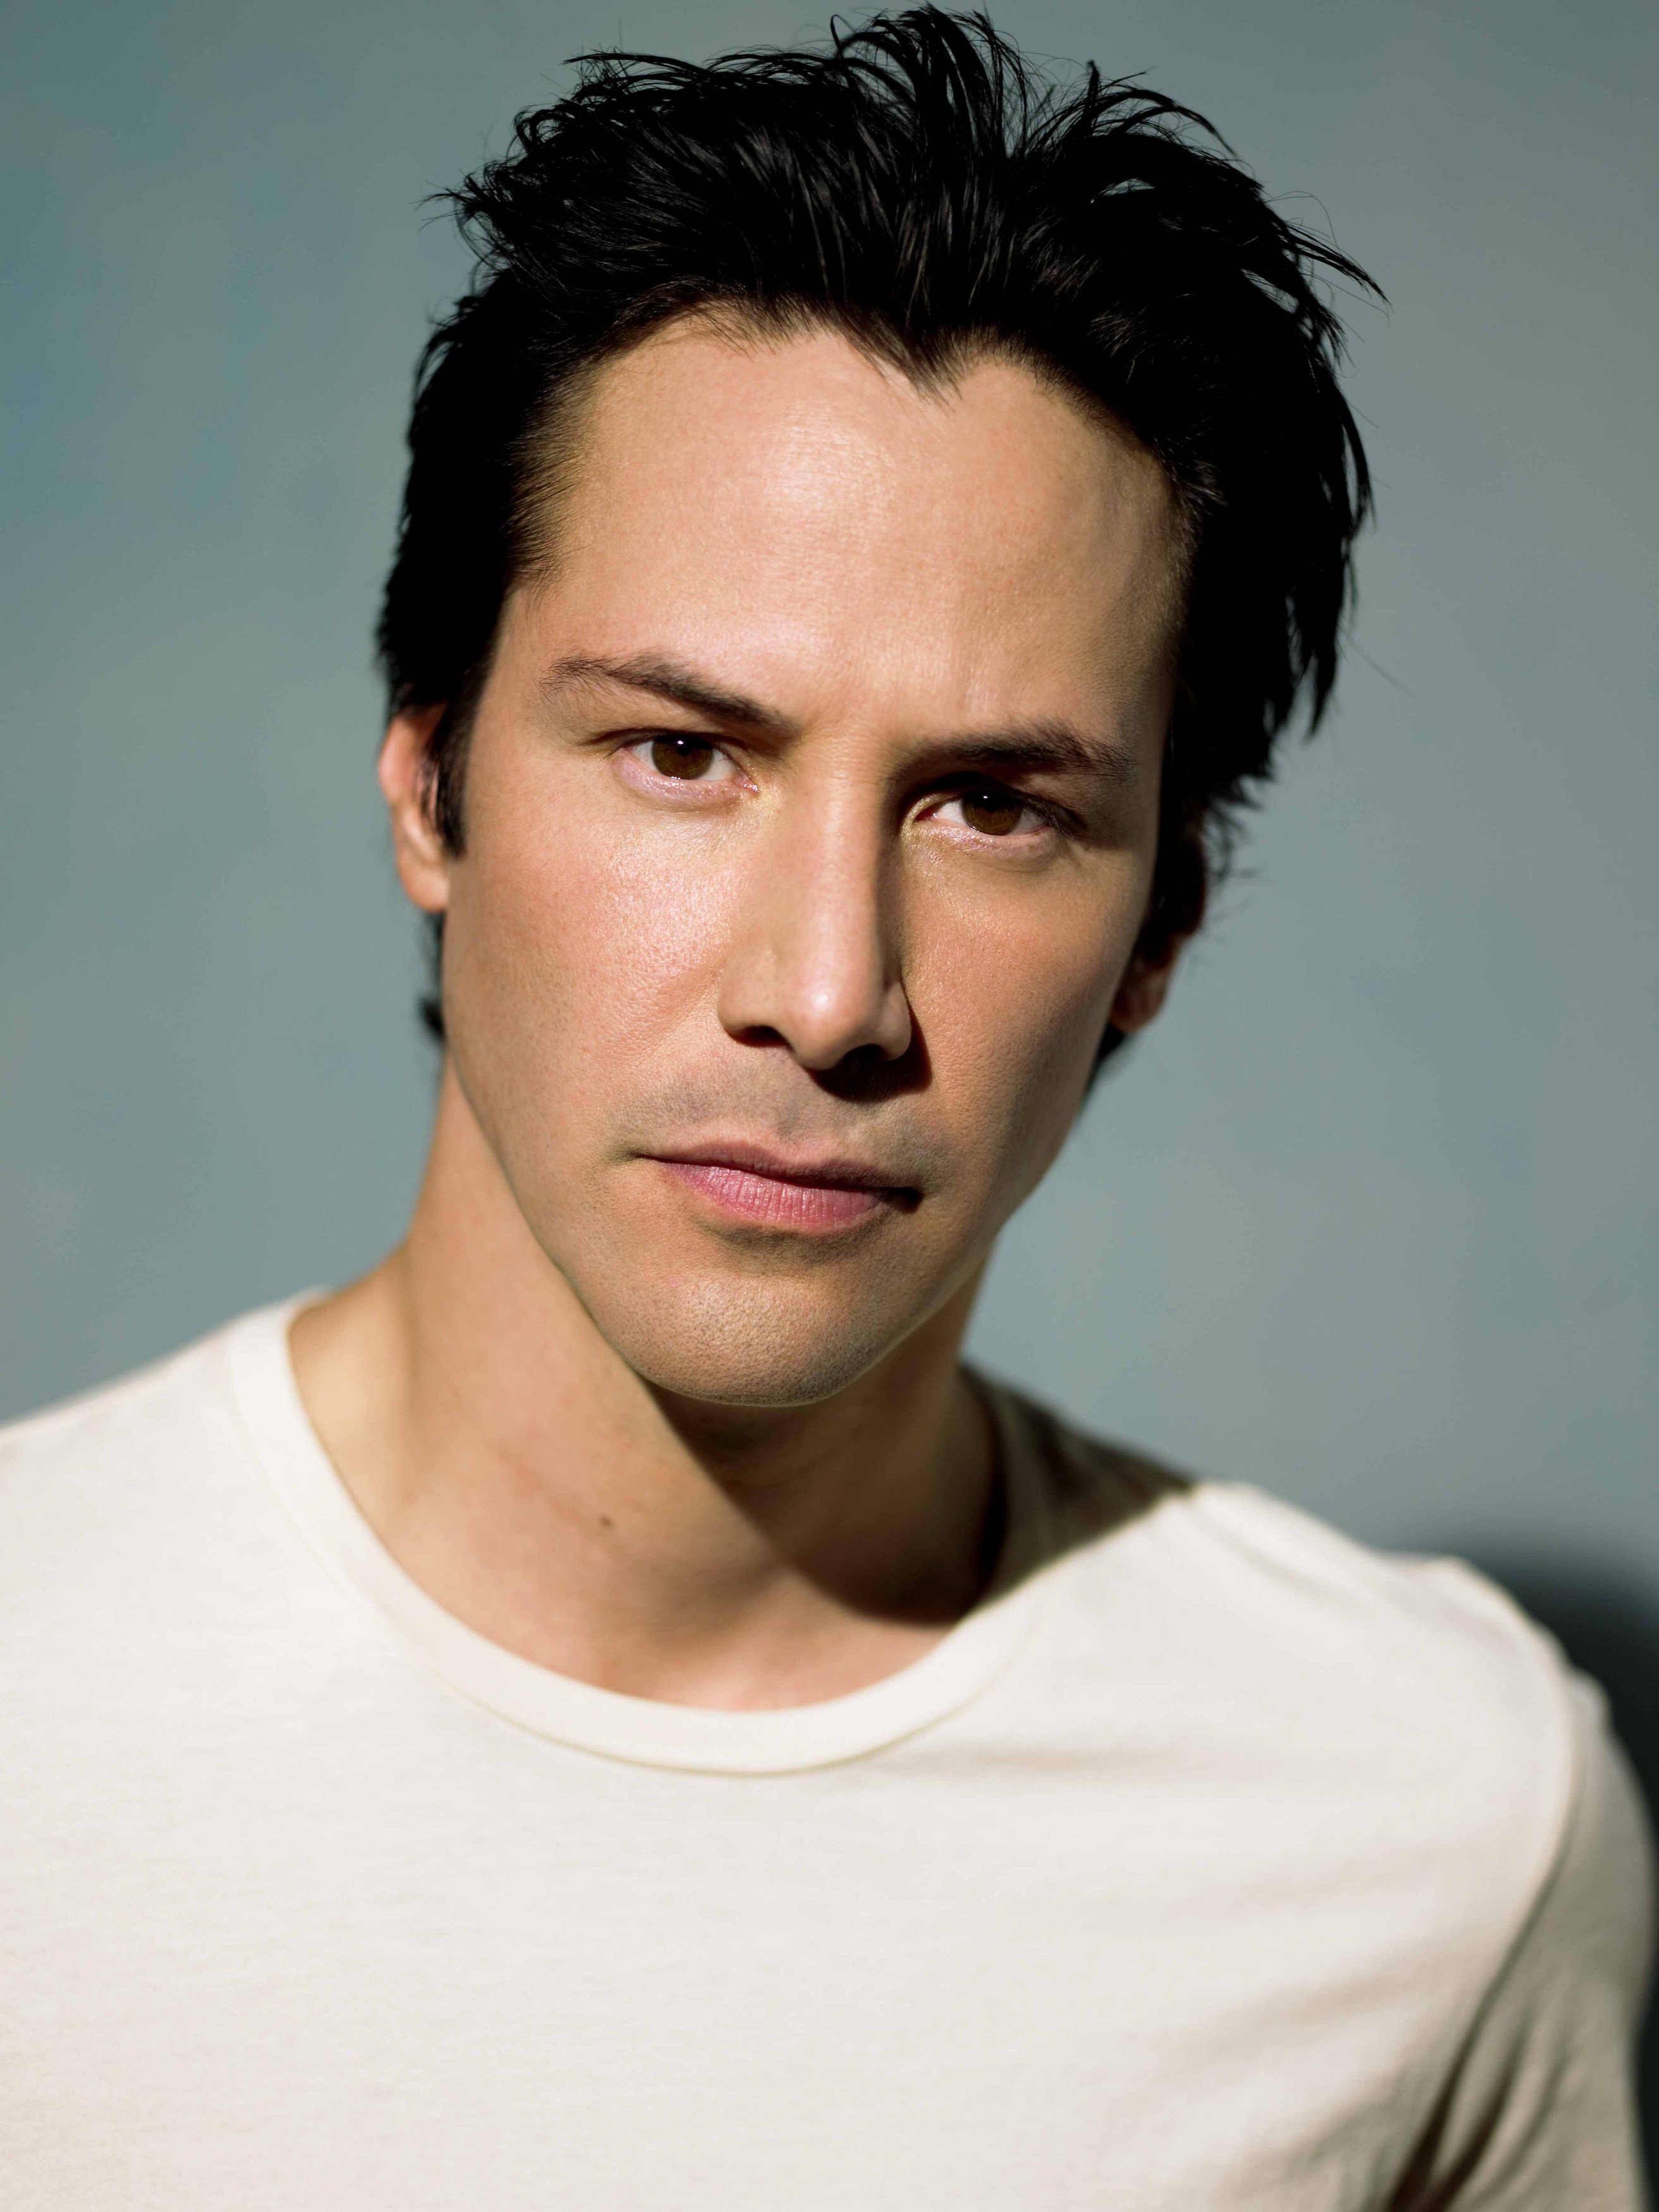 Keanu Reeves photo 38 of 235 pics, wallpaper - photo #58362 - ThePlace22625 x 3500